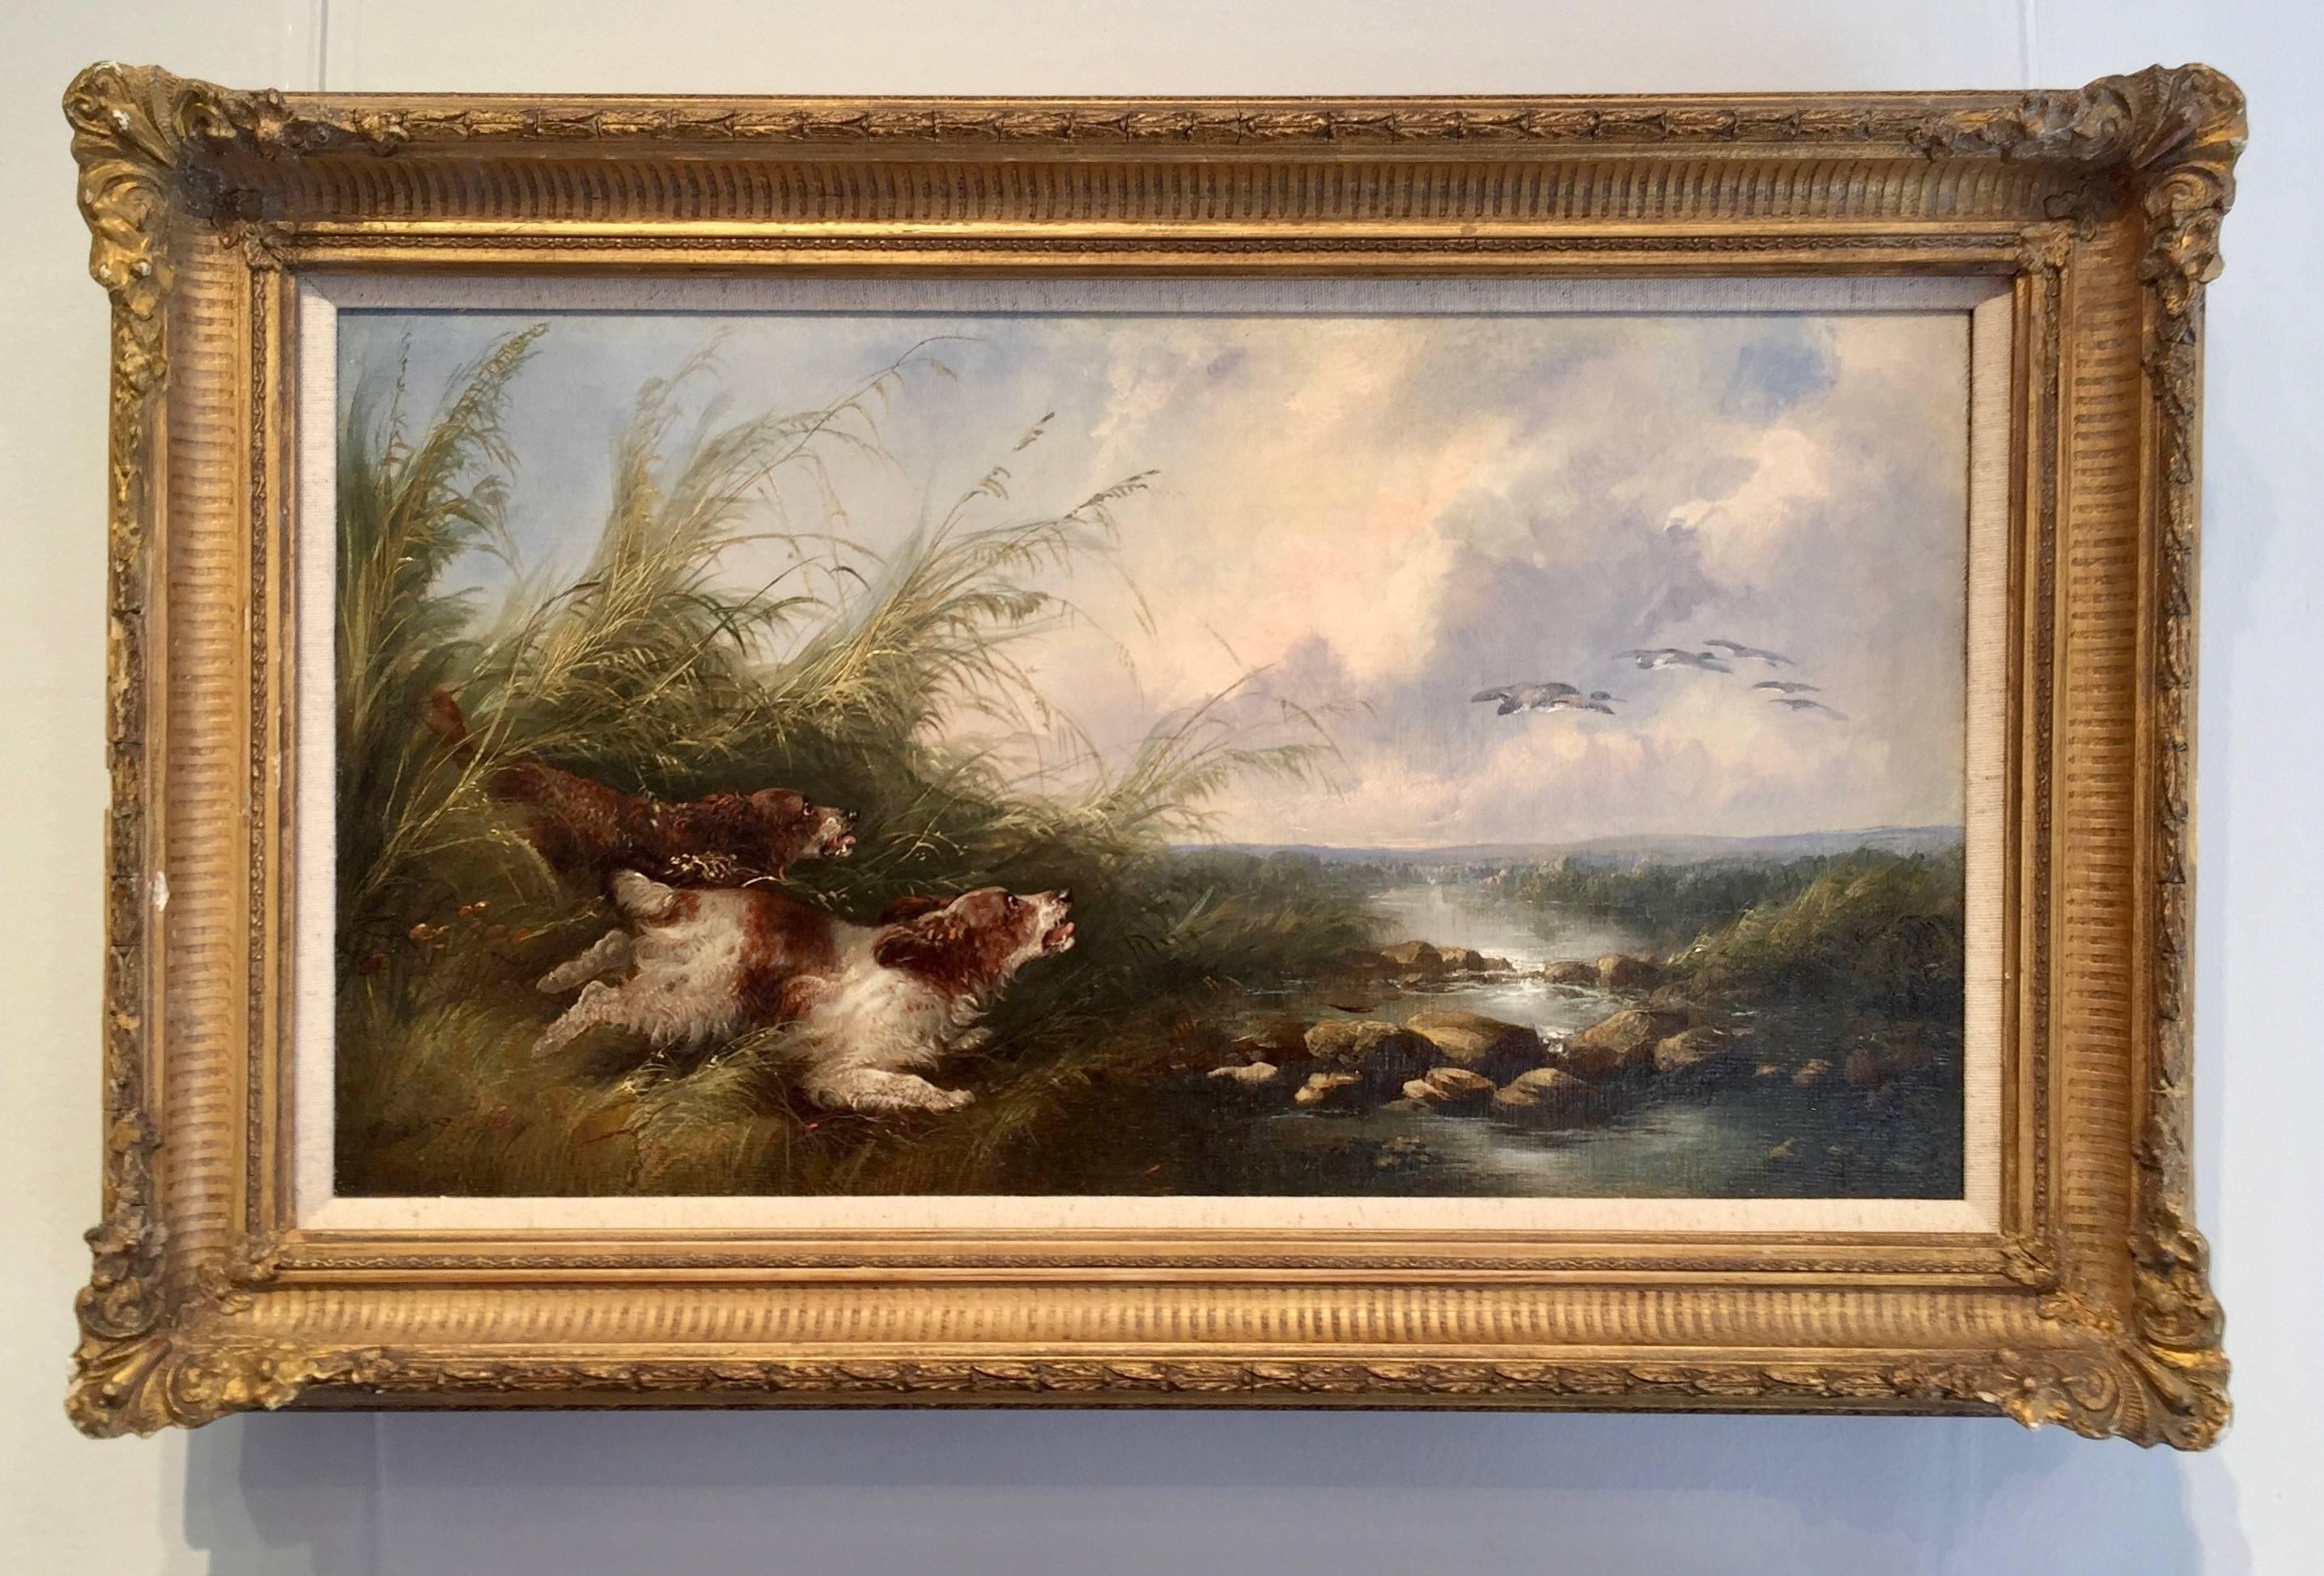 George Armfield Animal Painting - English Spaniel dogs chasing ducks  by a river